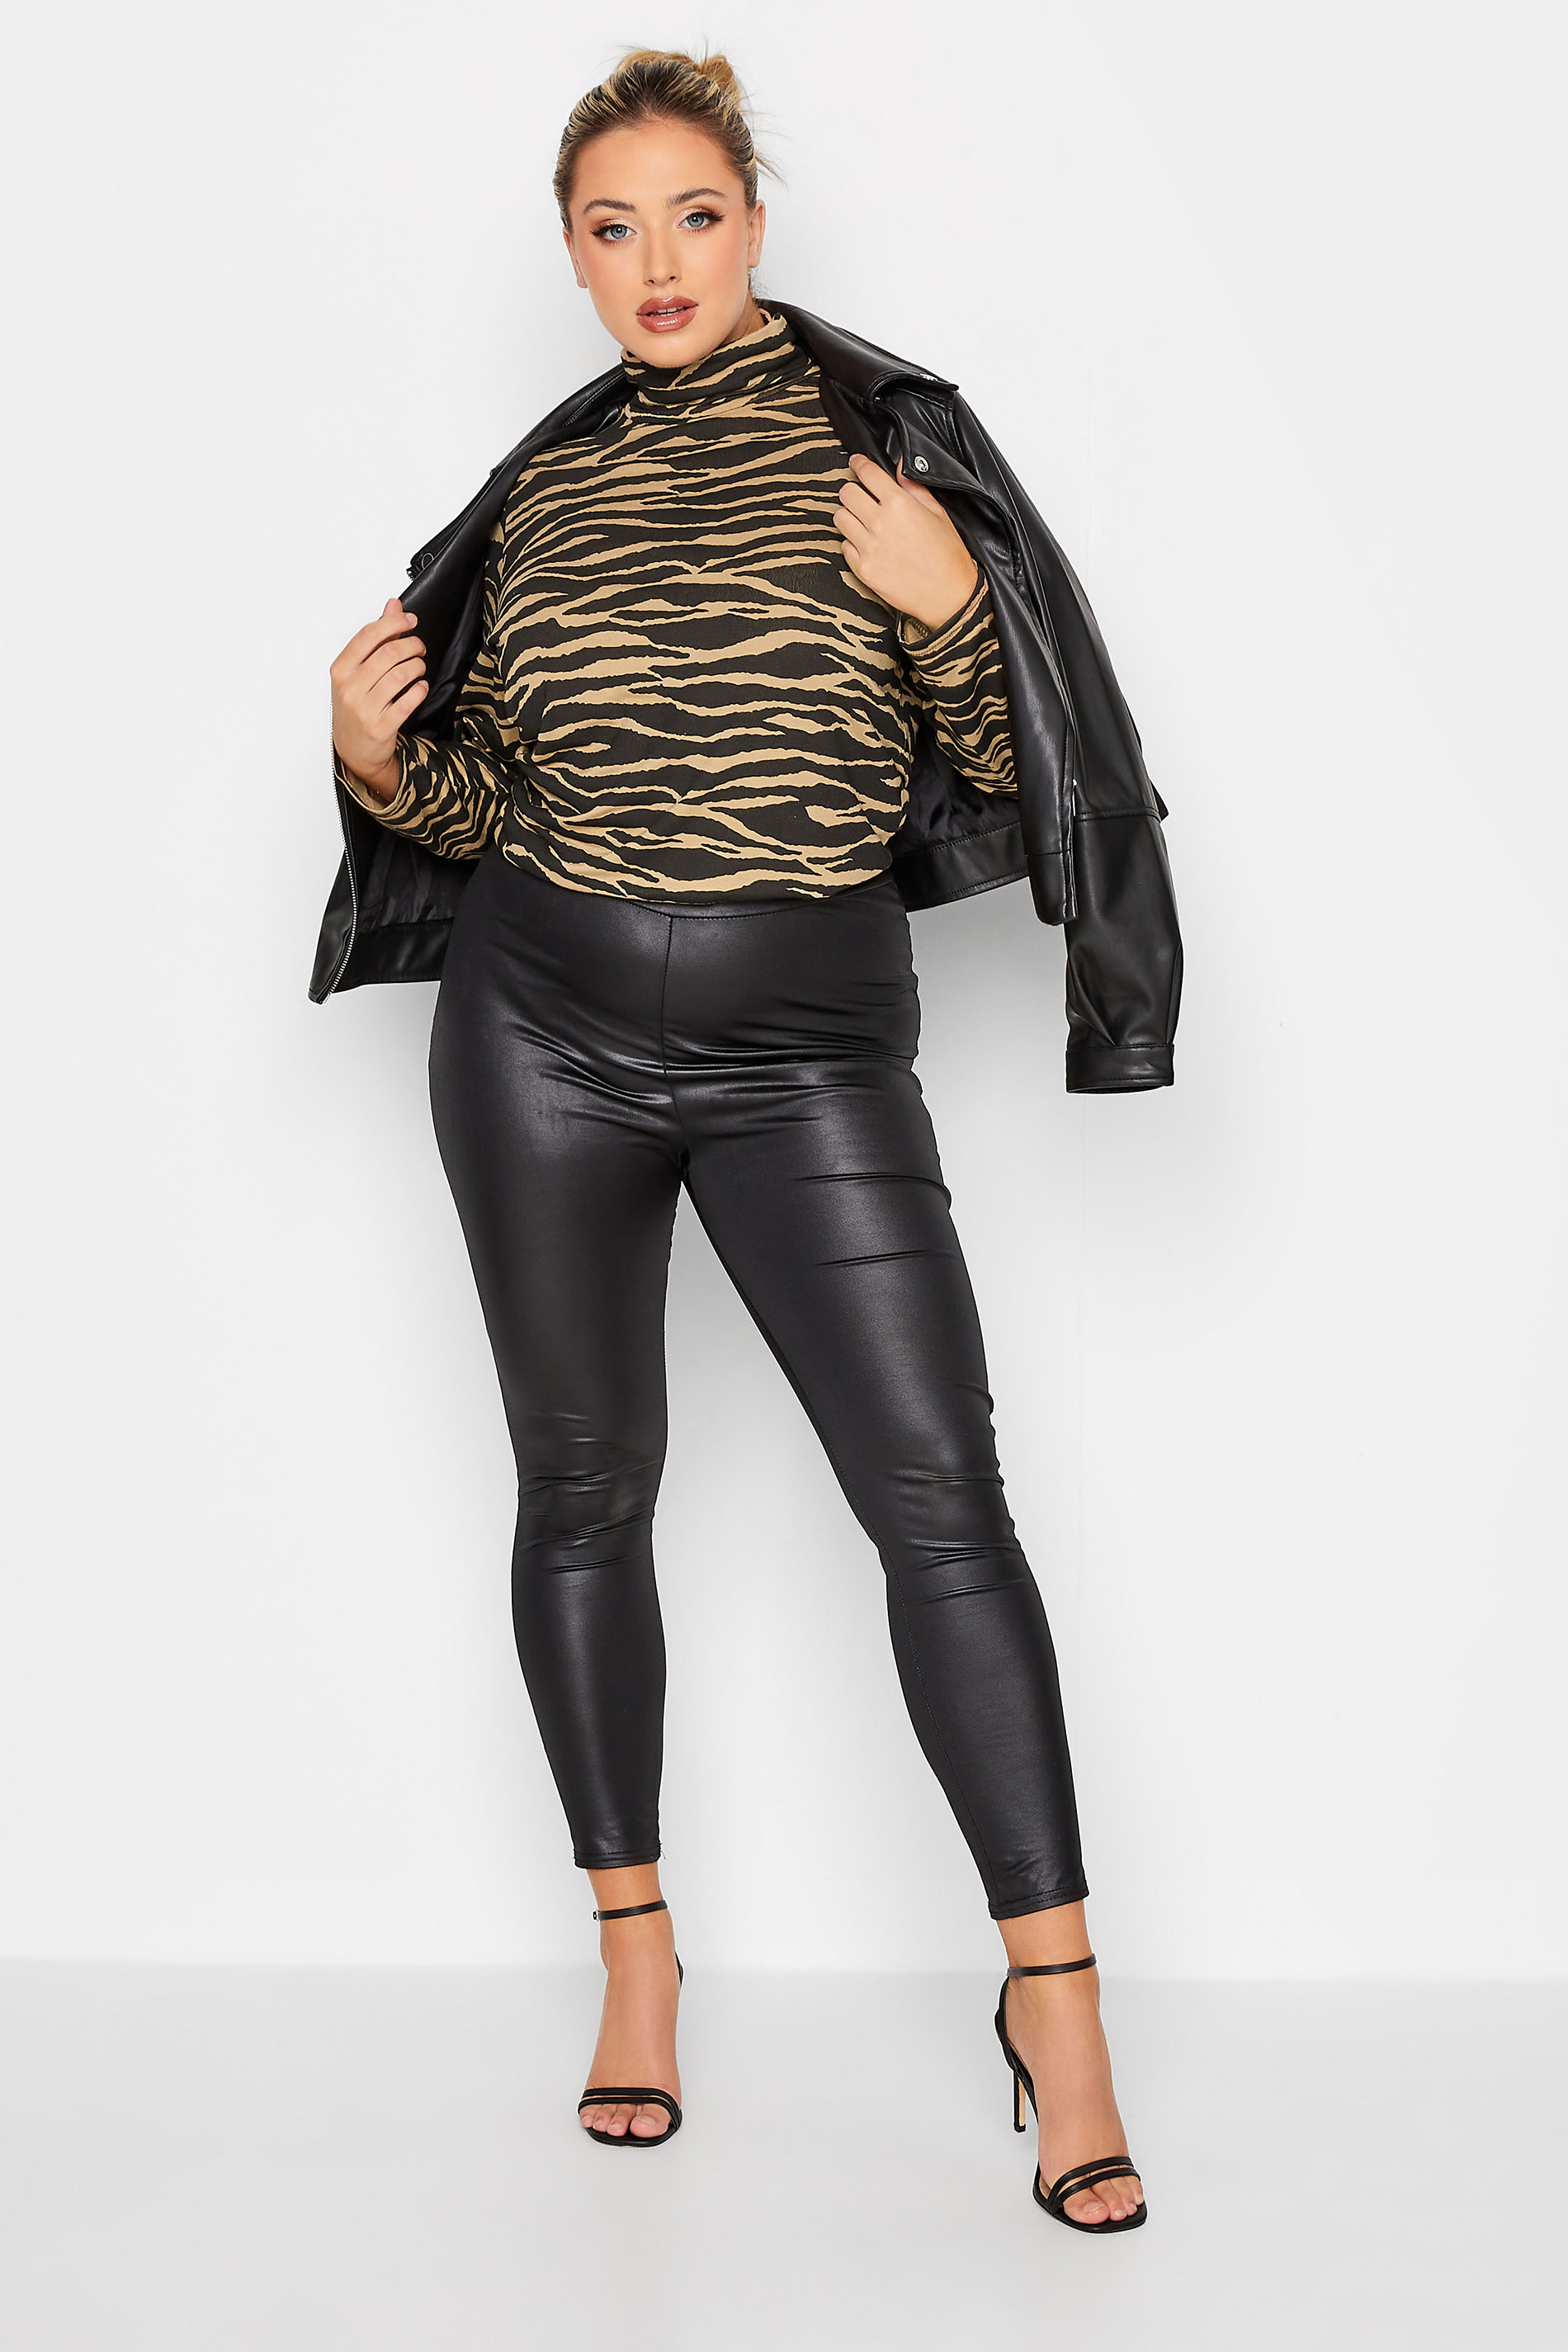 LIMITED COLLECTION Plus Size Black & Brown Zebra Print Turtle Neck Top | Yours Clothing 2